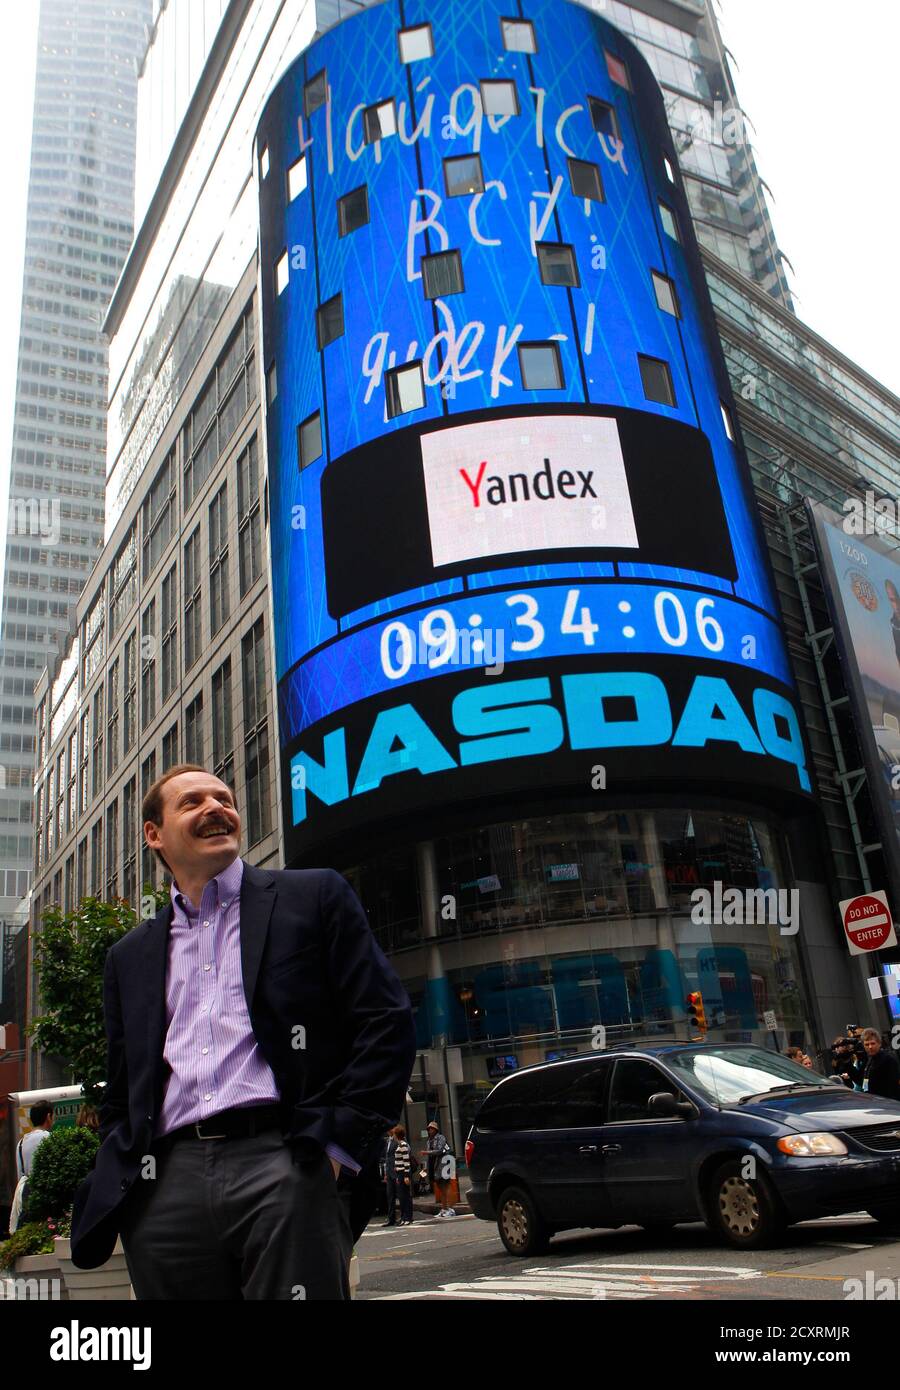 Yandex founder and CEO Arkady Volozh stands outside the Nasdaq market site in New York, May 24, 2011, after Yandex was officially listed on the Nasdaq in their IPO. The Nasdaq listing values Russia's leading internet search engine at $8 billion, an eye-popping 500 times its worth when private equity investors bought into the company in 2000.  REUTERS/Mike Segar   (UNITED STATES - Tags: BUSINESS SCI TECH) Stock Photo